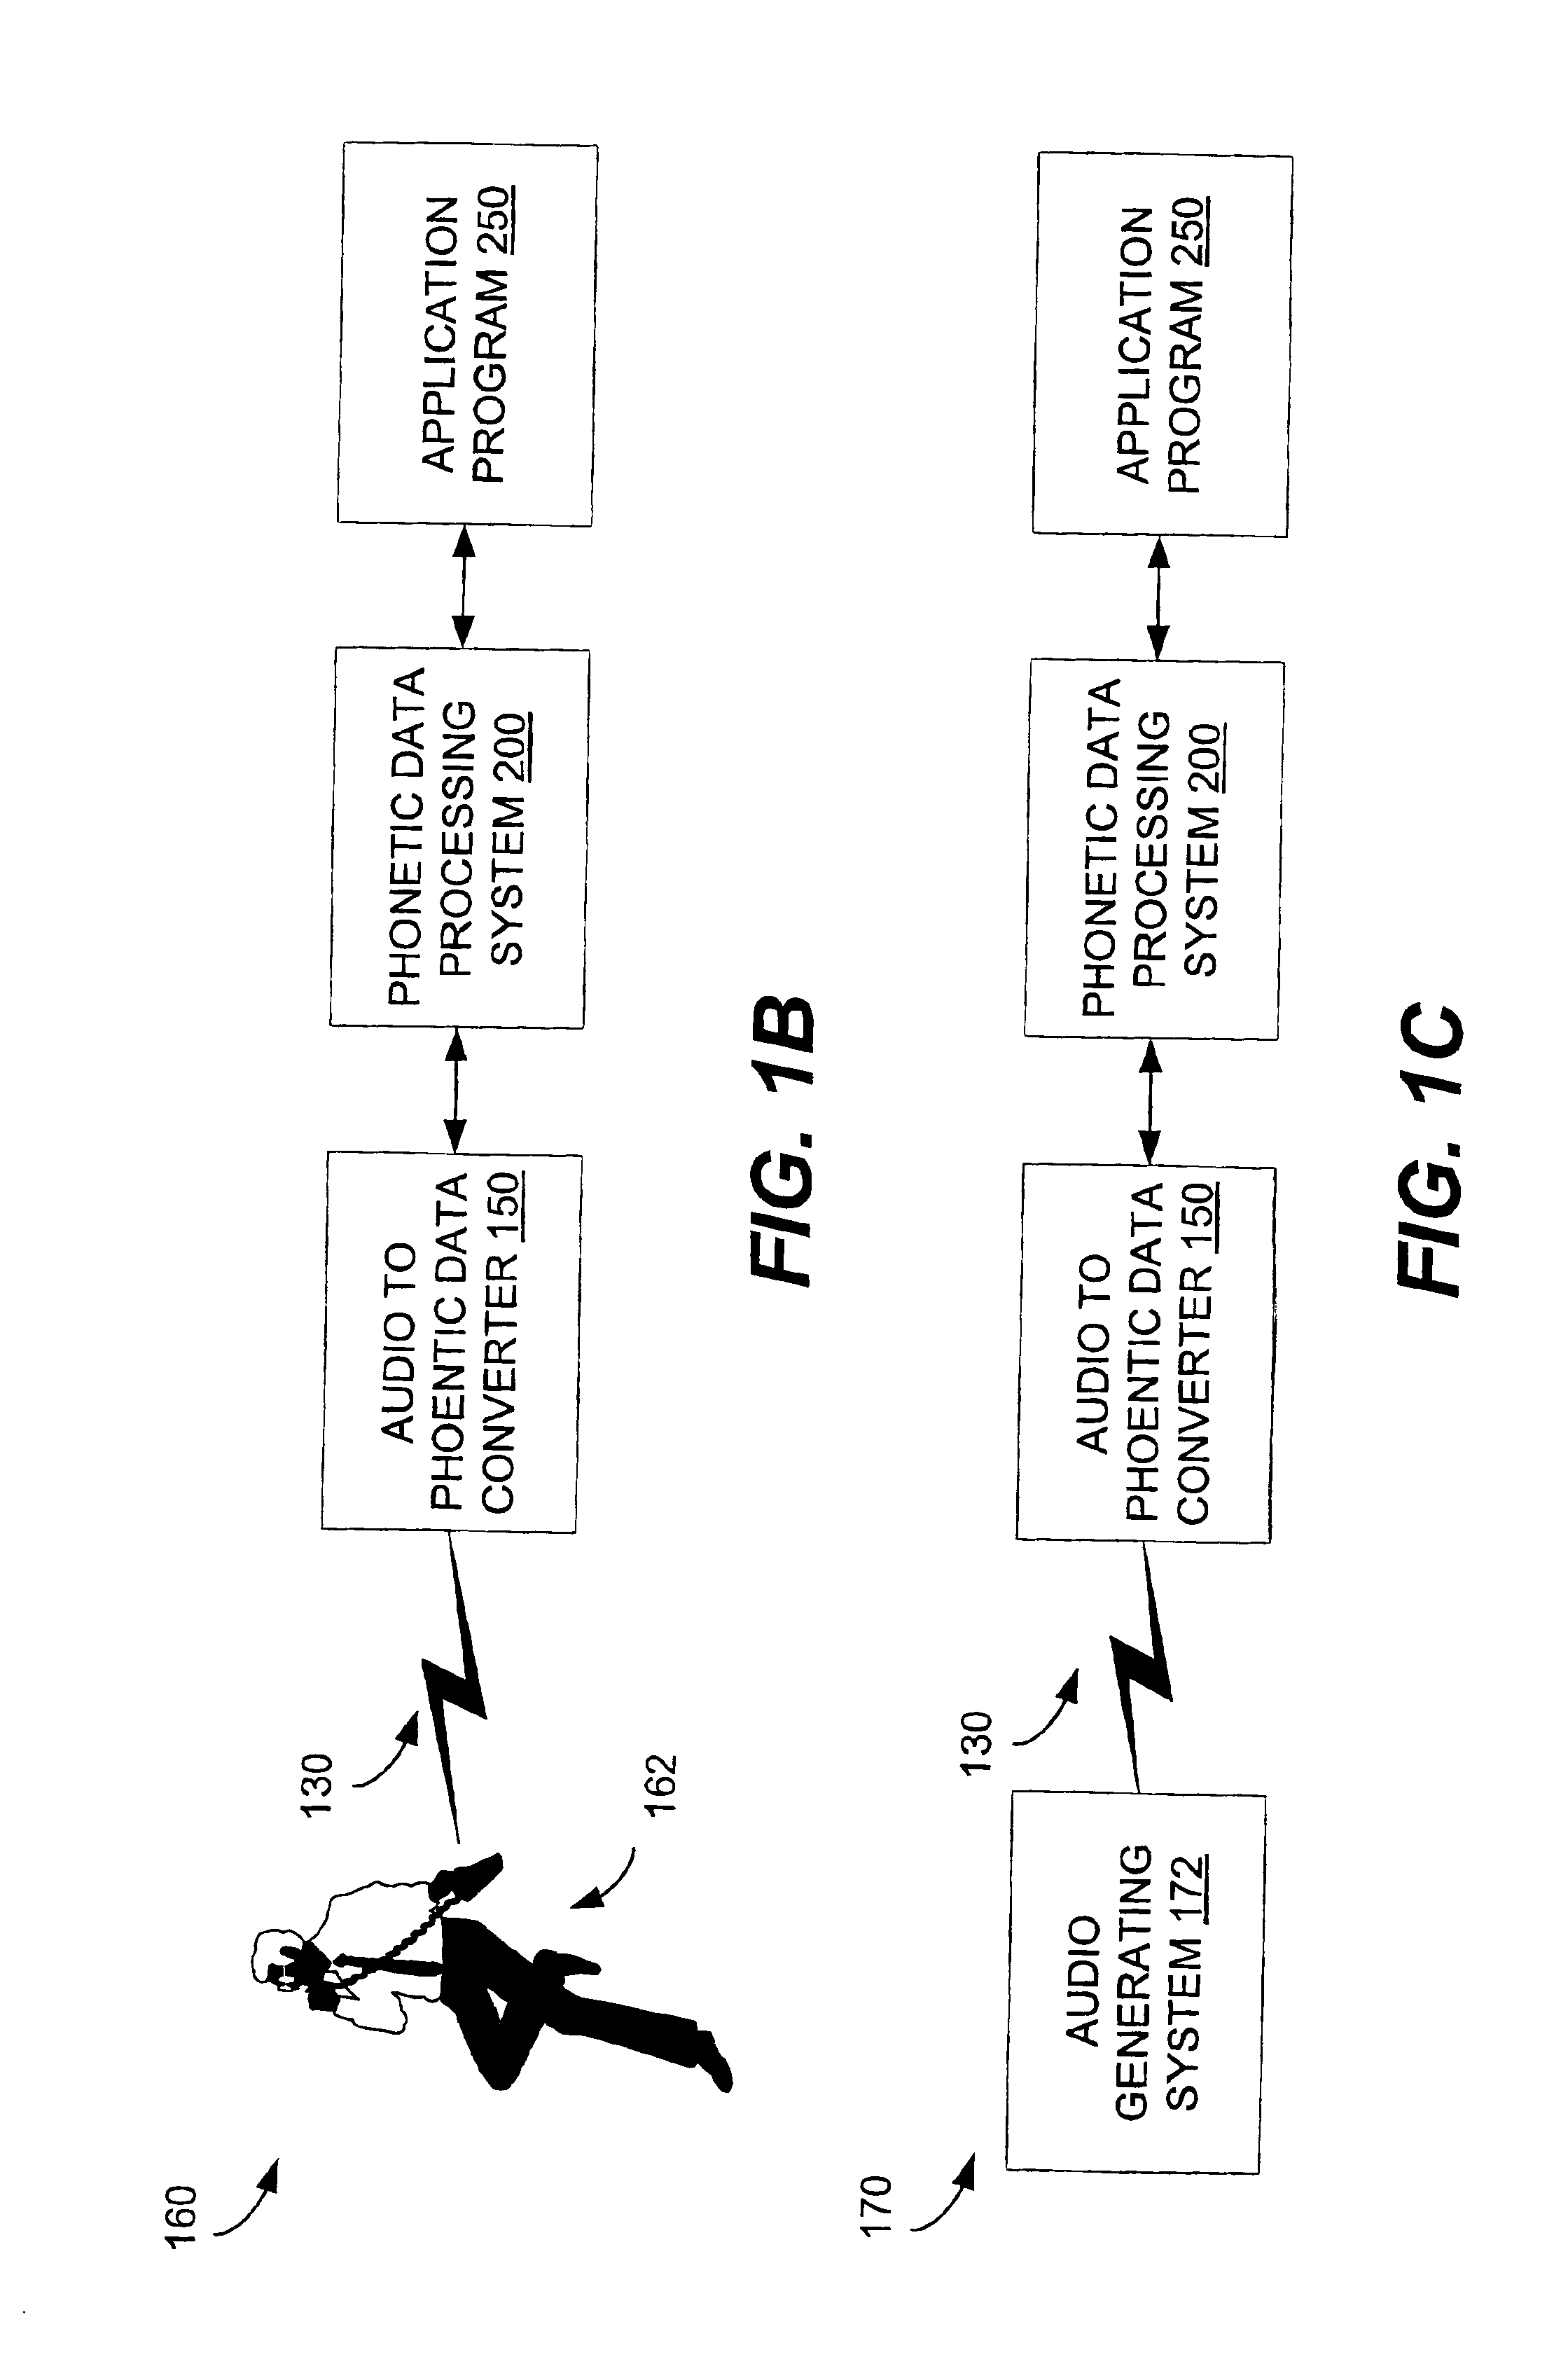 Phonetic data processing system and method